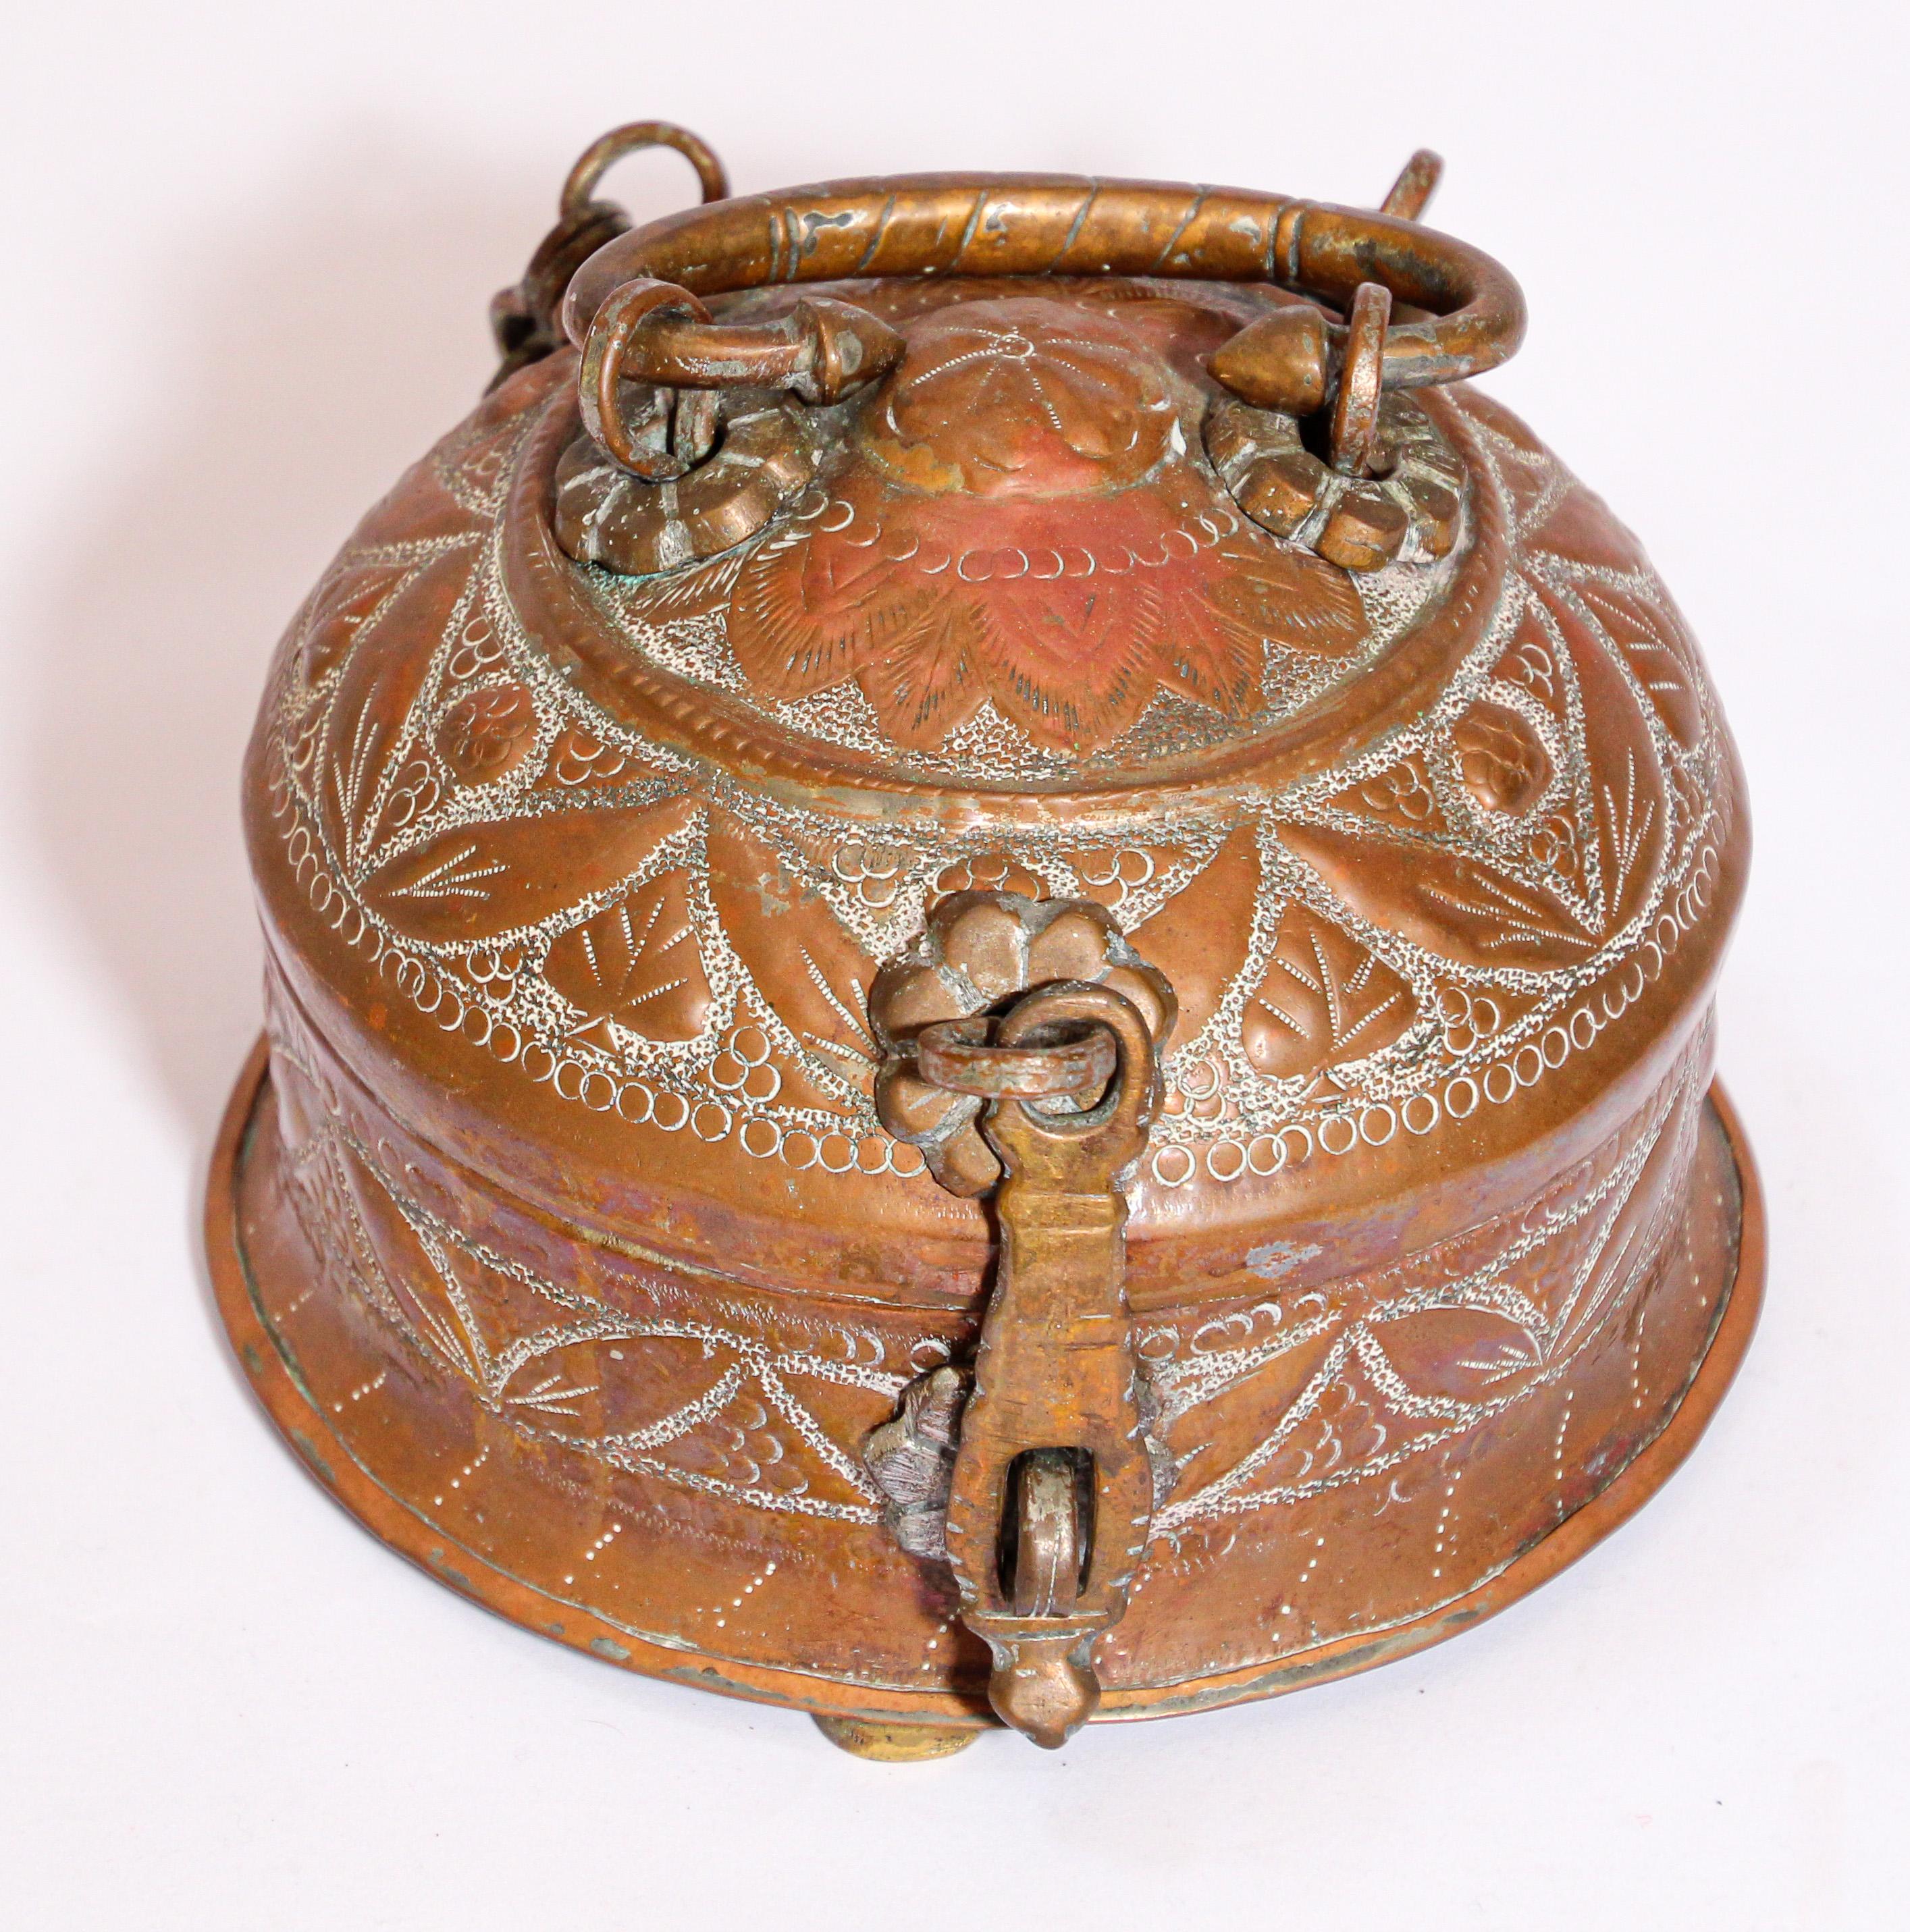 Handcrafted decorative round brass Indian lidded betel box with latch and a top handle.
Delicately and intricately hand-chased with geometric designs.
Used as a tea caddy with tea boxes and tray and cup inside.
Consuming betel leaves with several